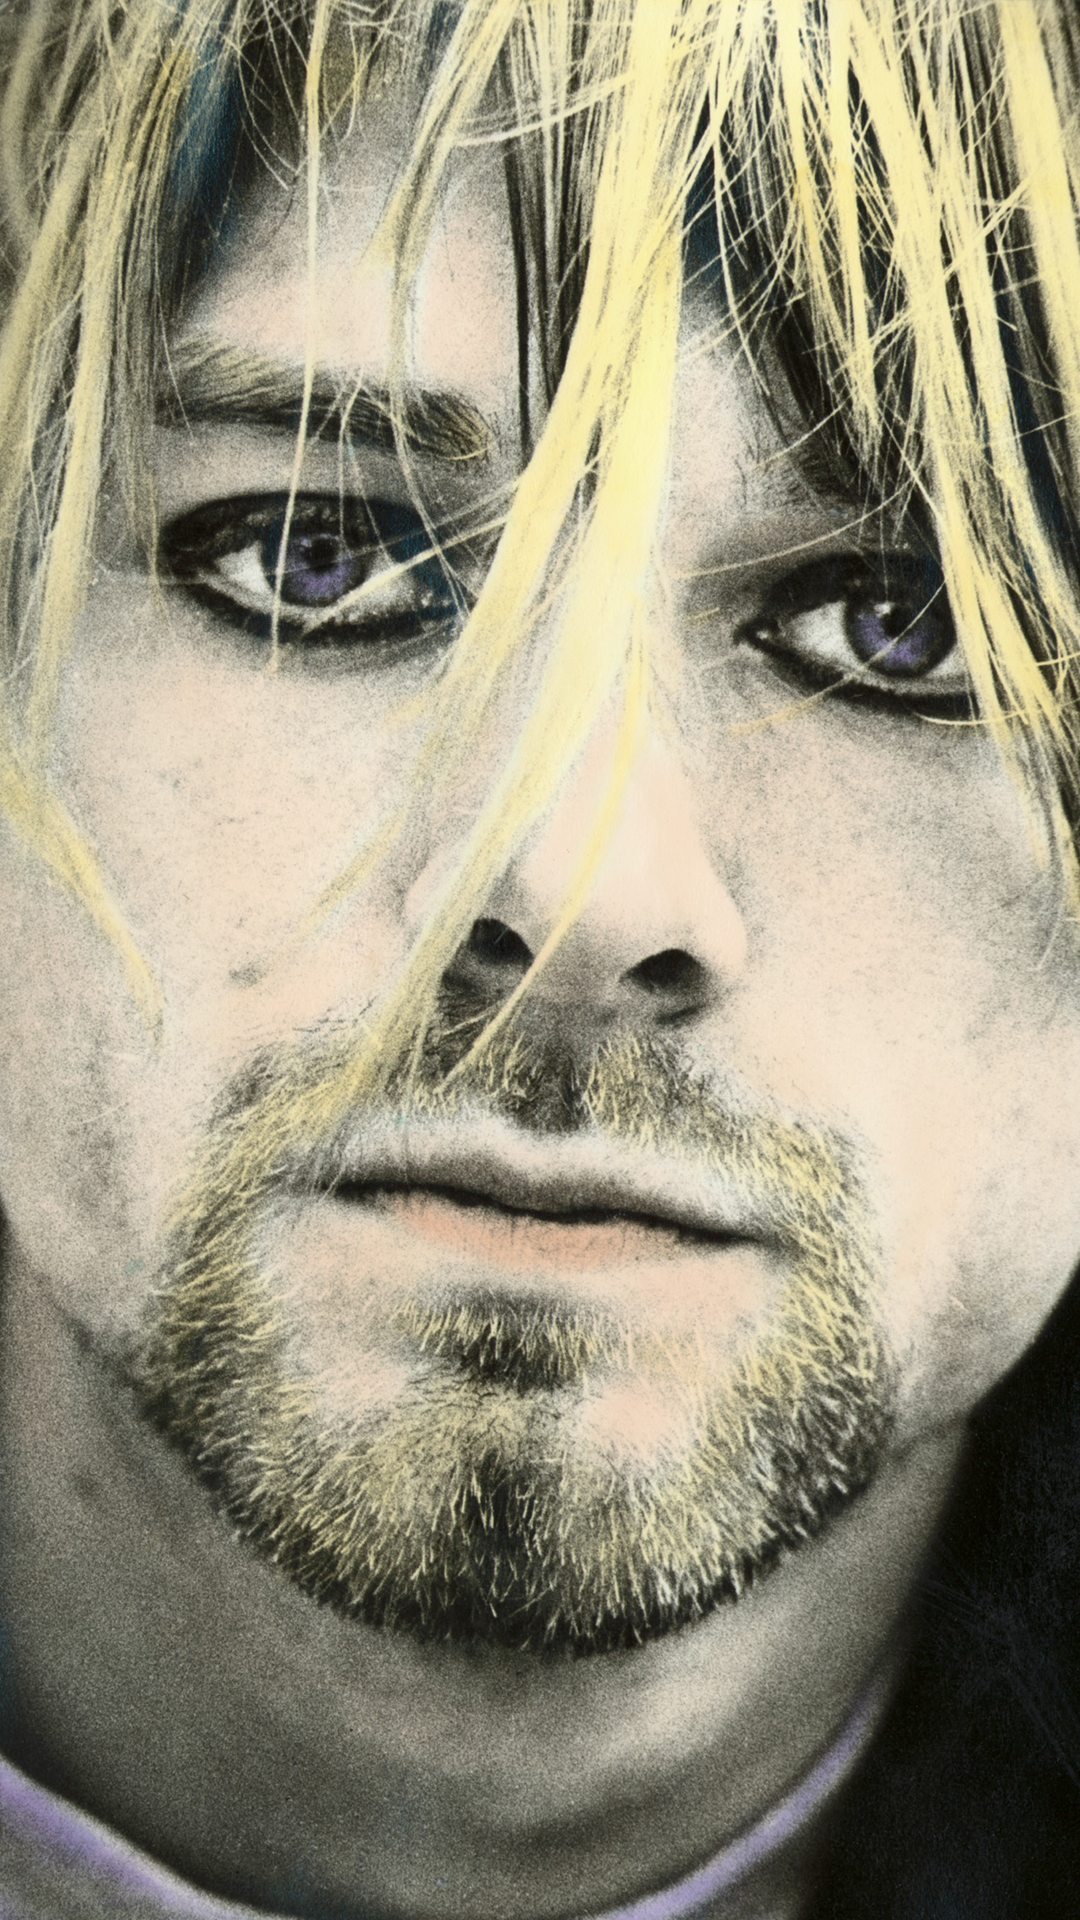 HD wallpaper: grayscale photo of group of people, Nirvana, Kurt Cobain,  Dave Grohl | Wallpaper Flare